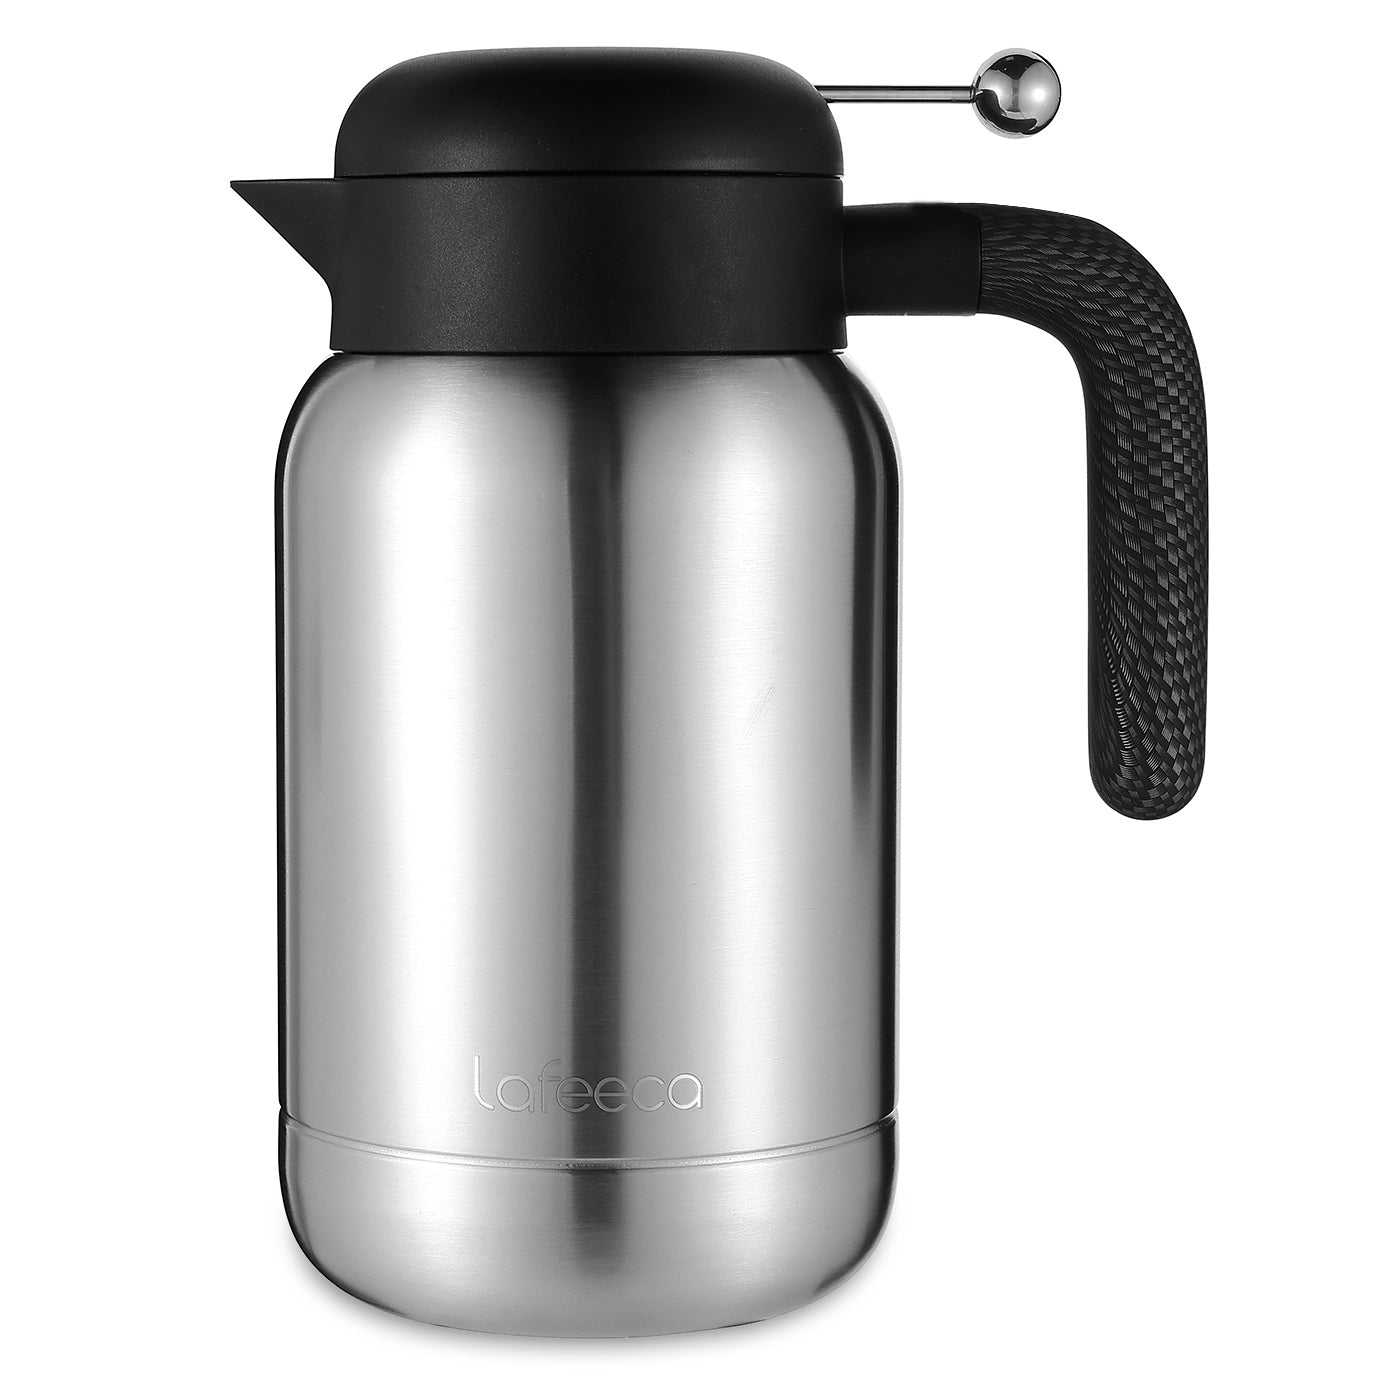 Lafeeca Thermal Coffee Carafe - Beverages Dispenser - Tea Pot Water Pitcher - Double Wall Insulated Thermos - 1500 ml Stainless